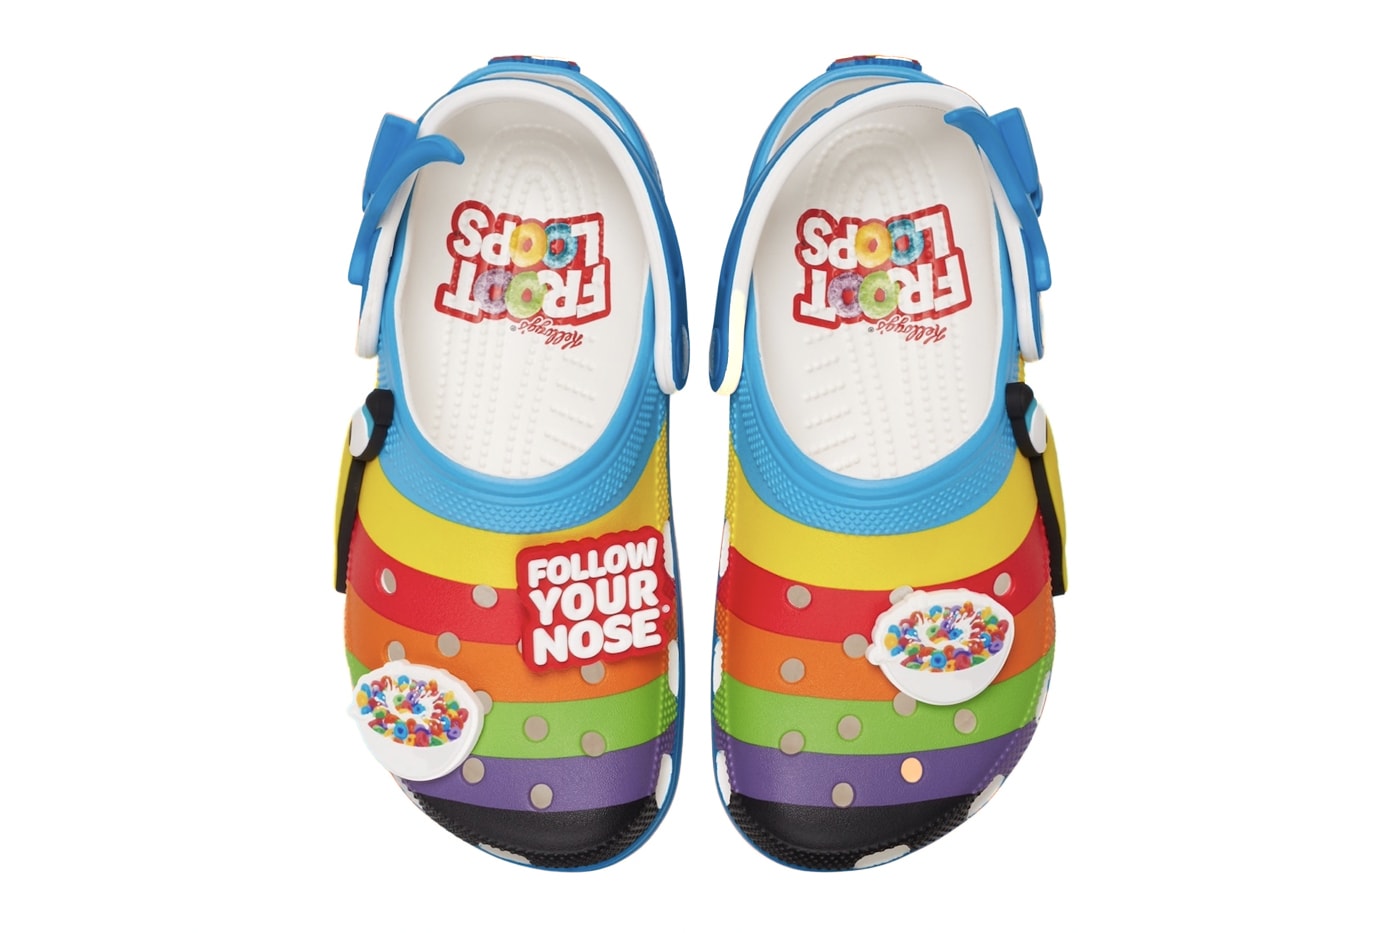 Official Look at the Froot Loops x Crocs Classic Clog 210139-90H multicolor toucan cereal bird 